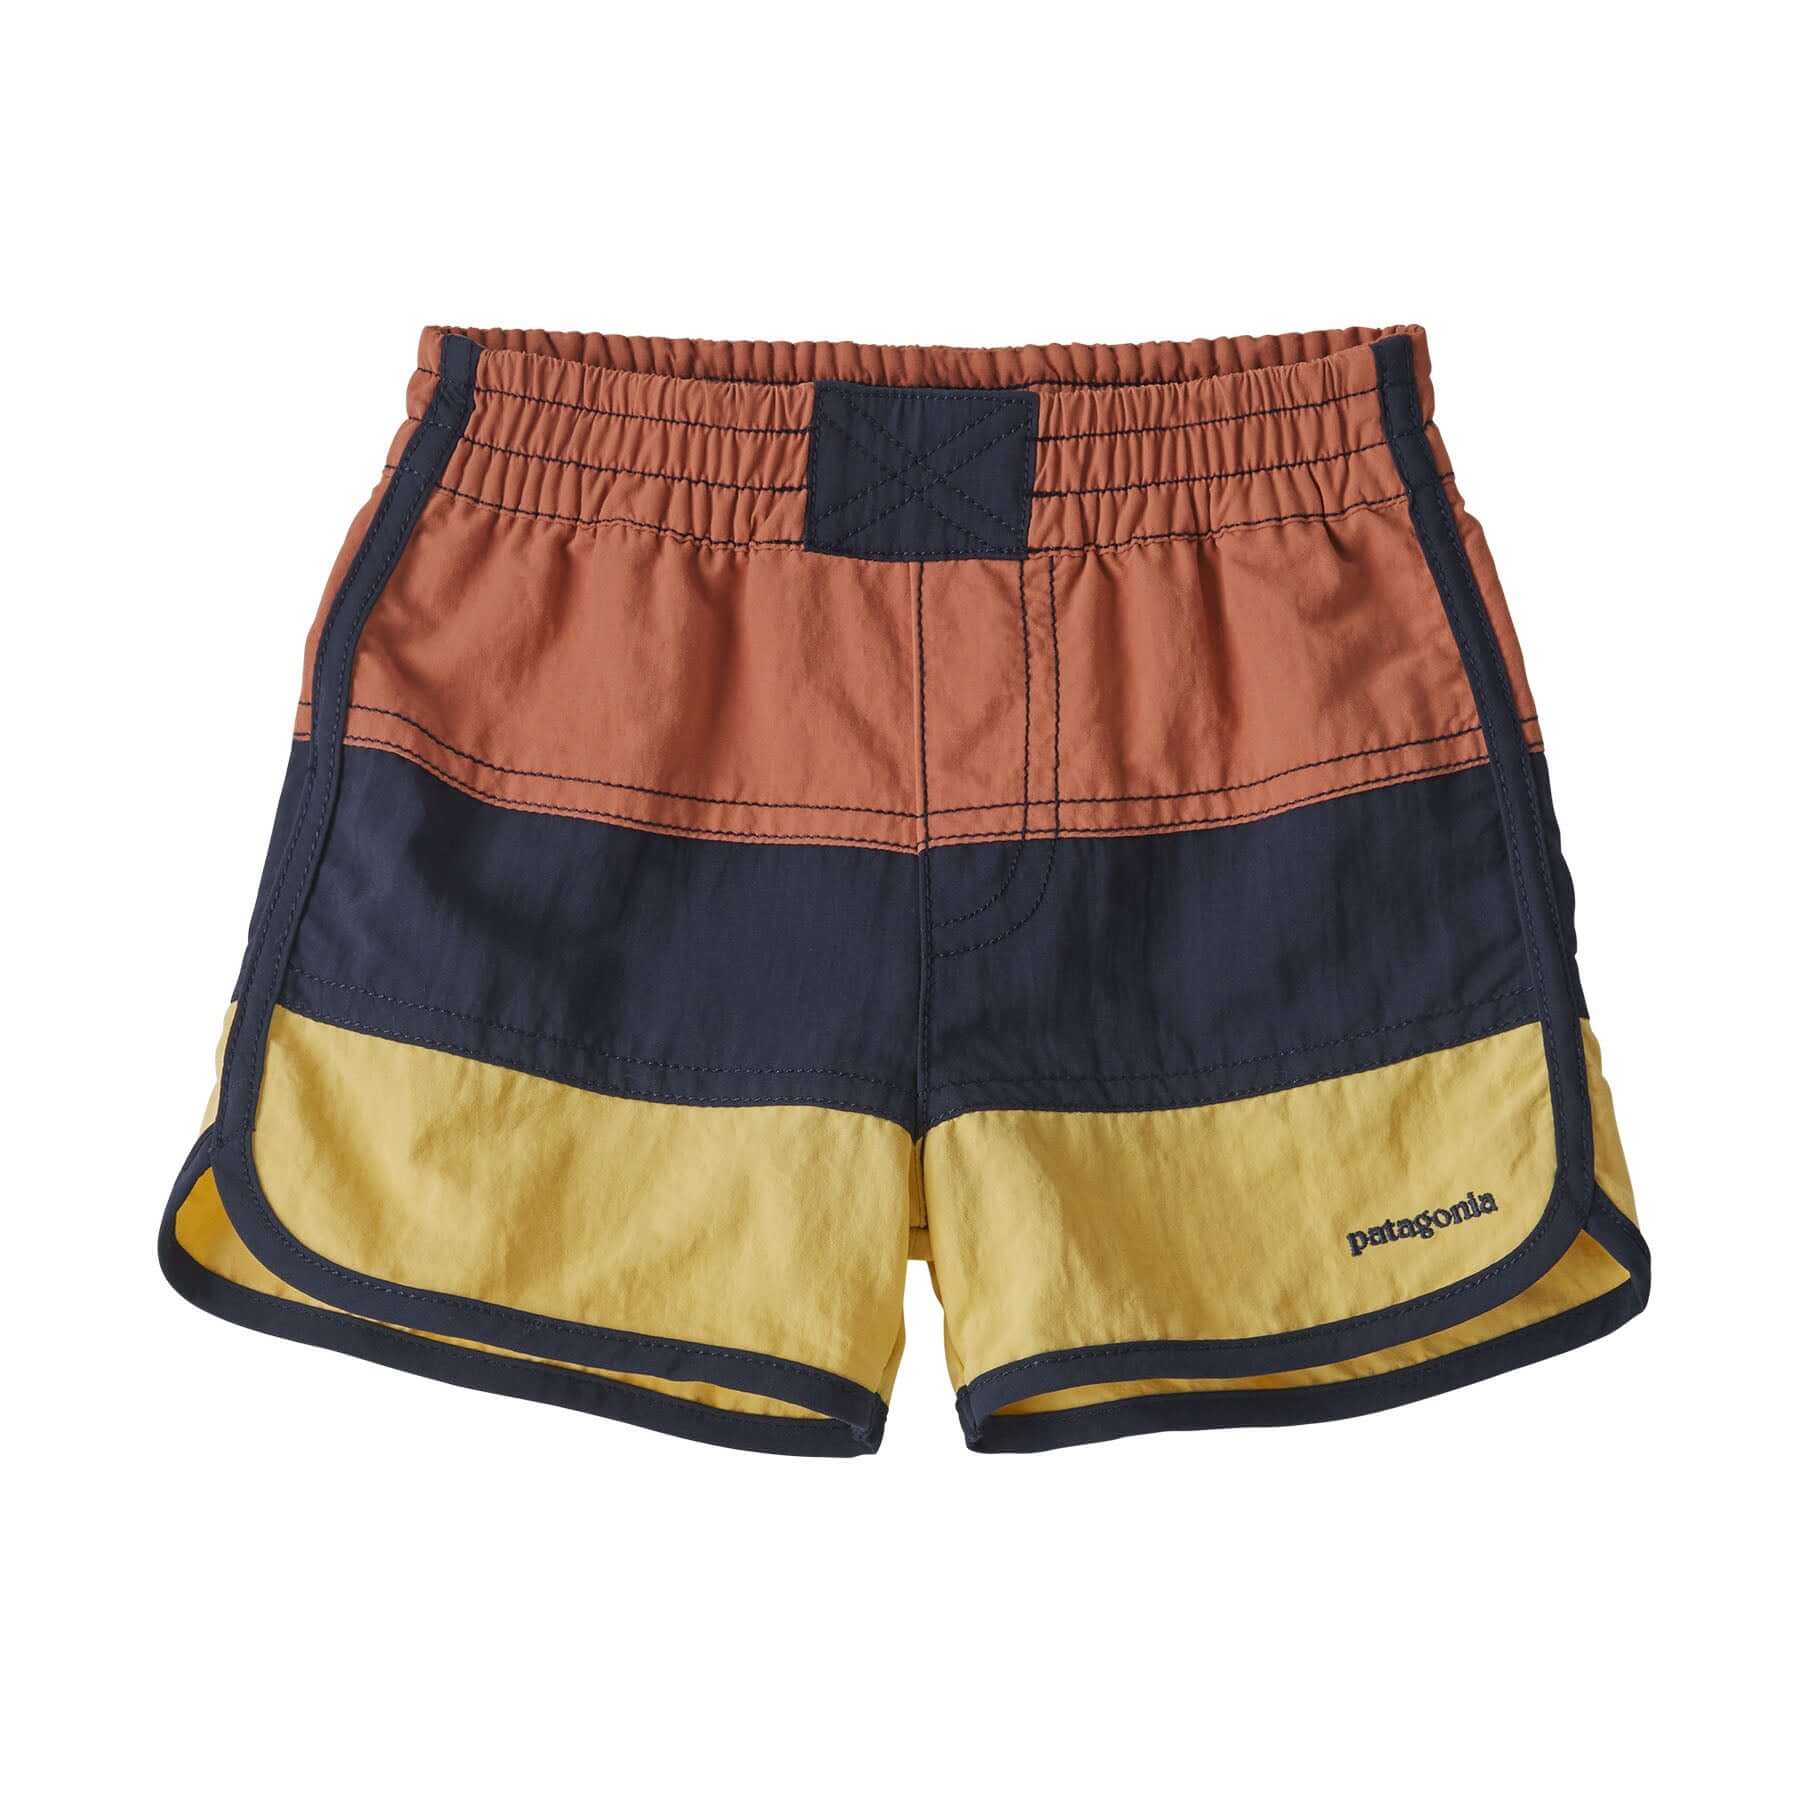 Baby Boardshorts in Sienna Clay | Patagonia Bend